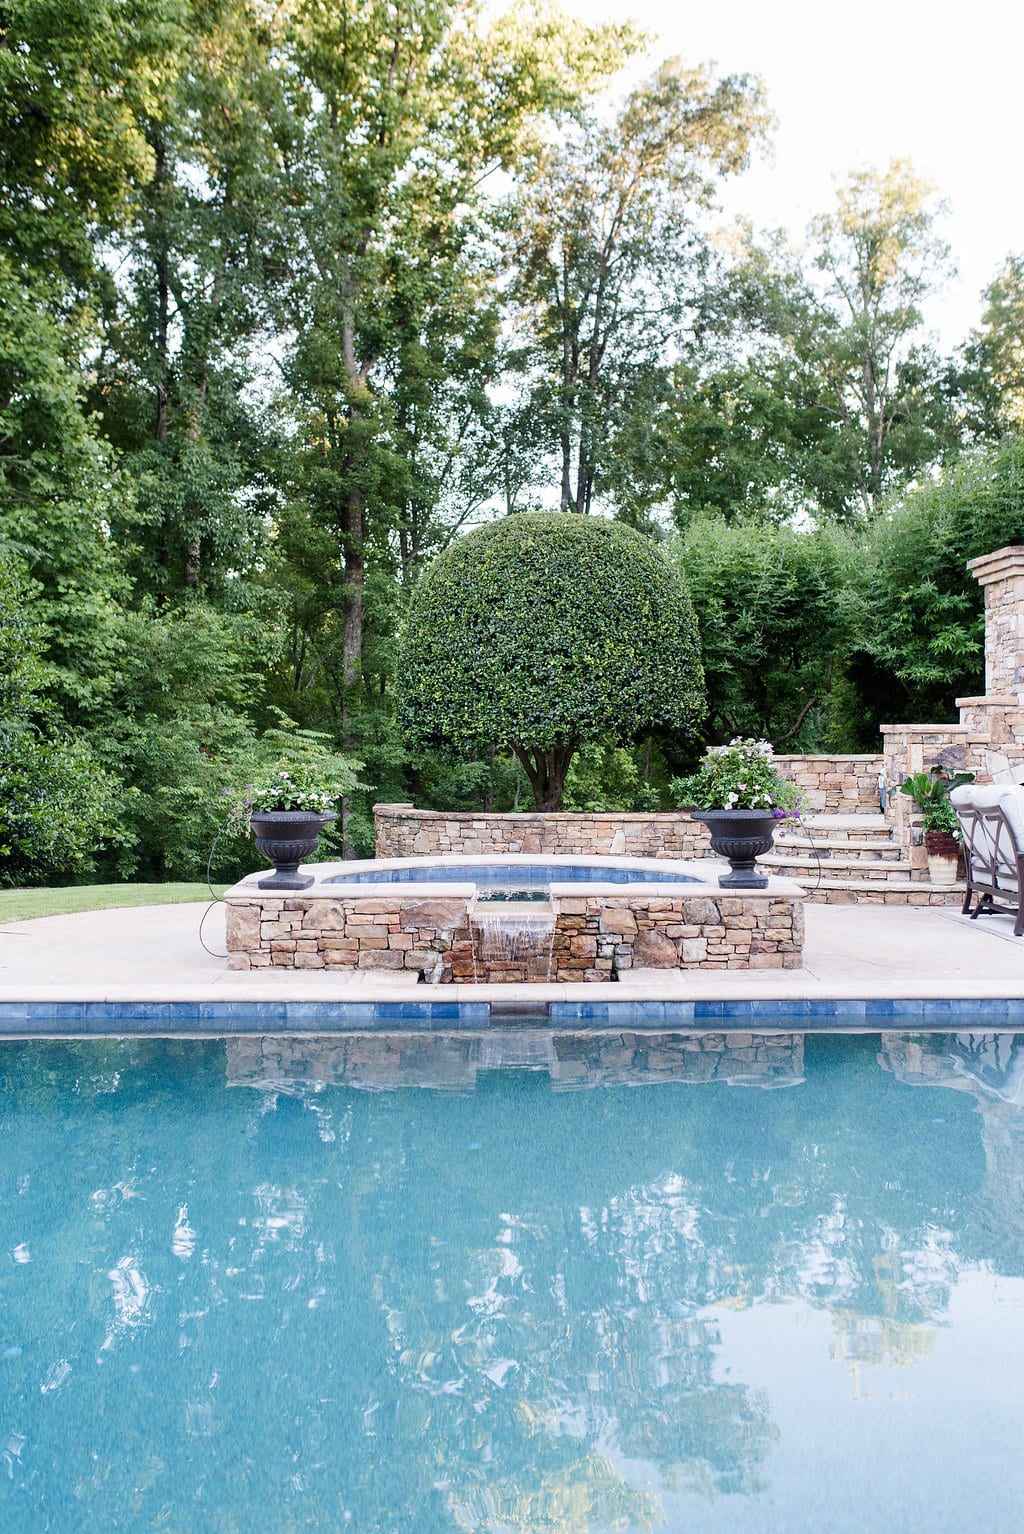 Pool design ideas include adding an elevated spa hot tub with water feature framed by two container planters.